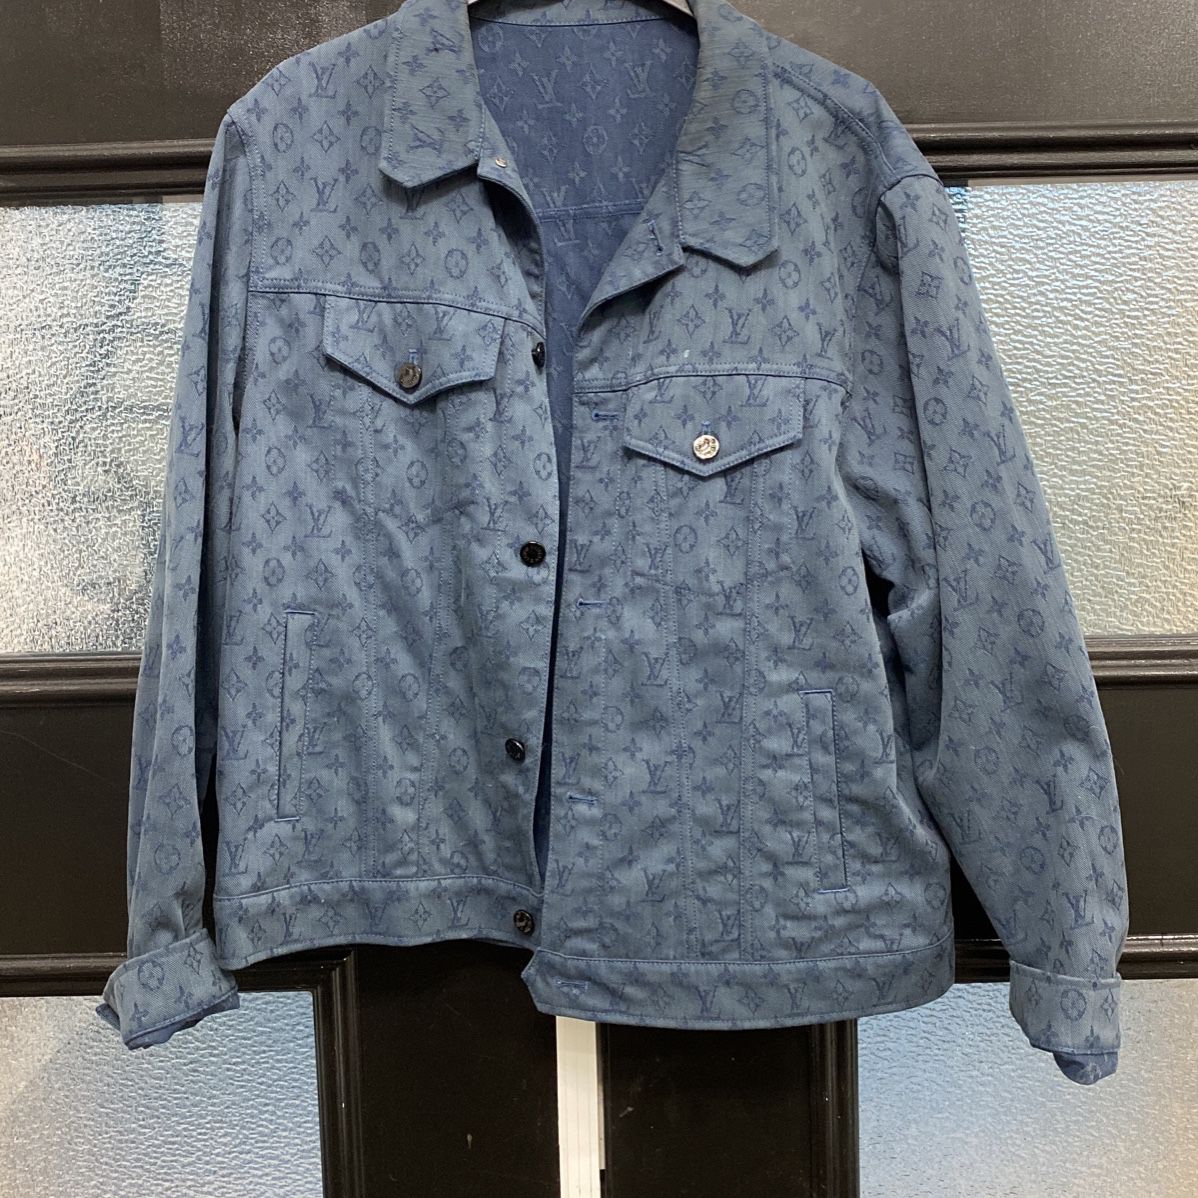 Lv Jacket Replica Size Xl for Sale in New York, NY - OfferUp